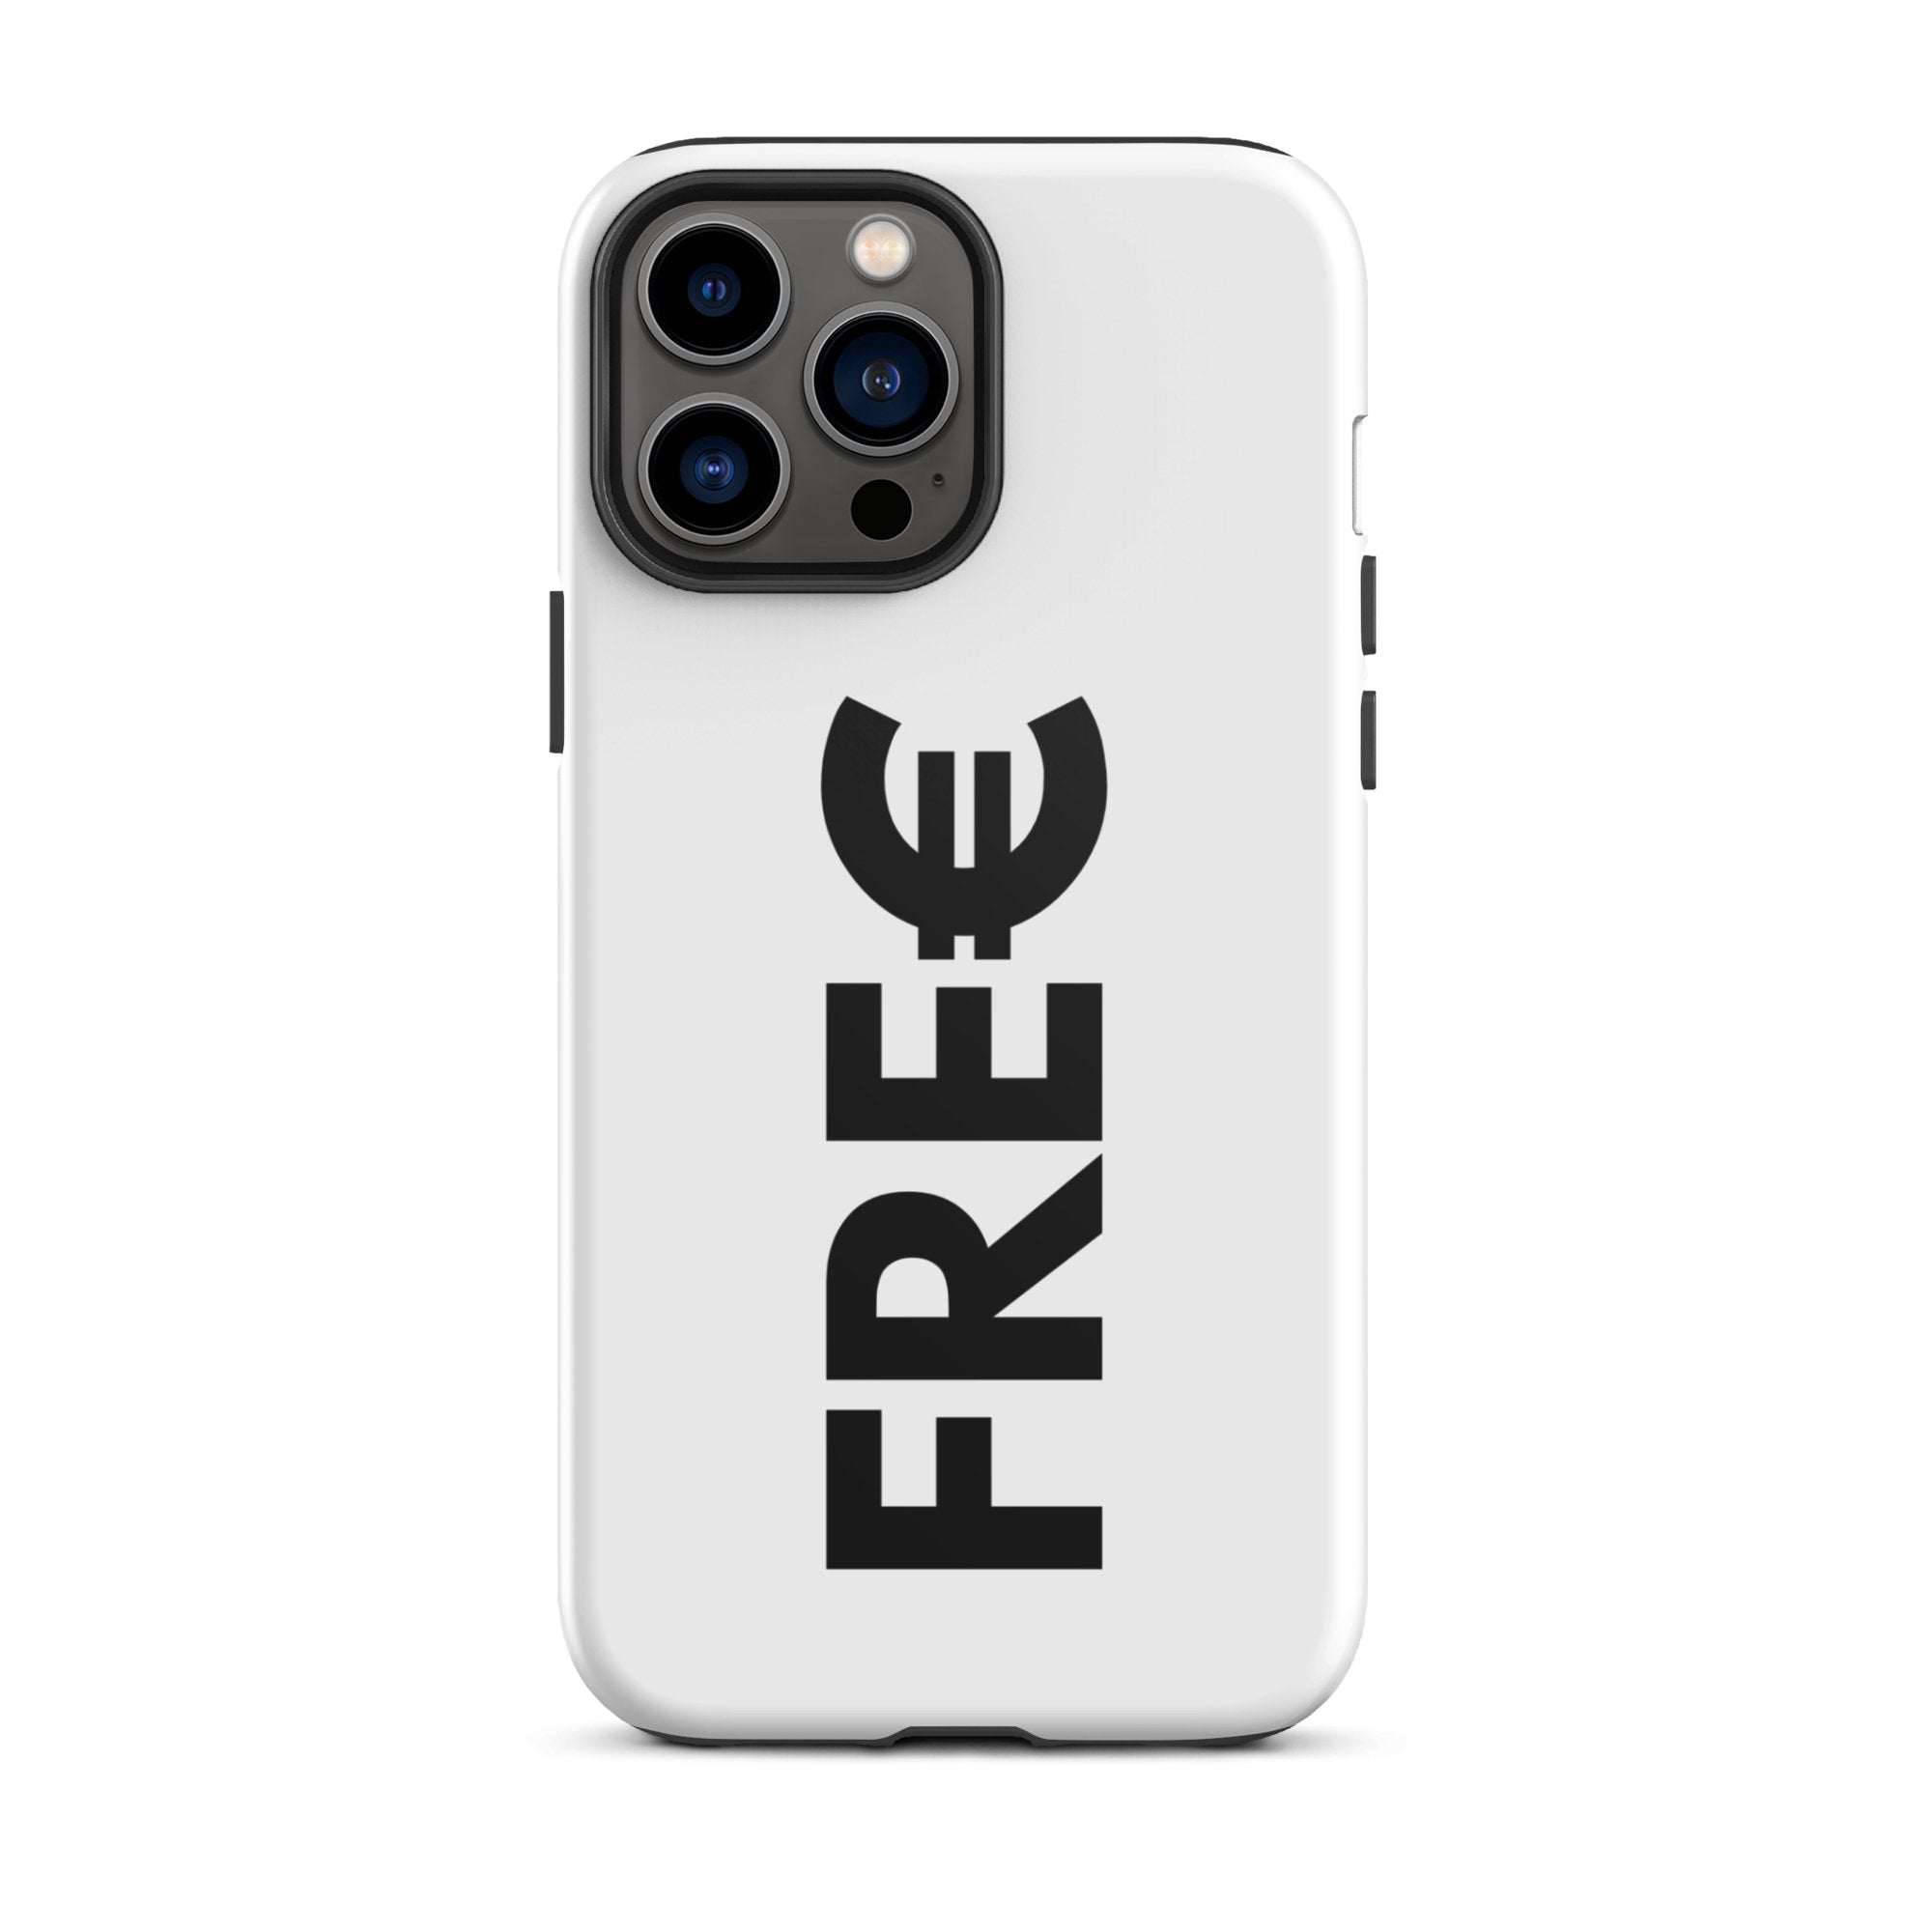 FRE€ - Iphone Case